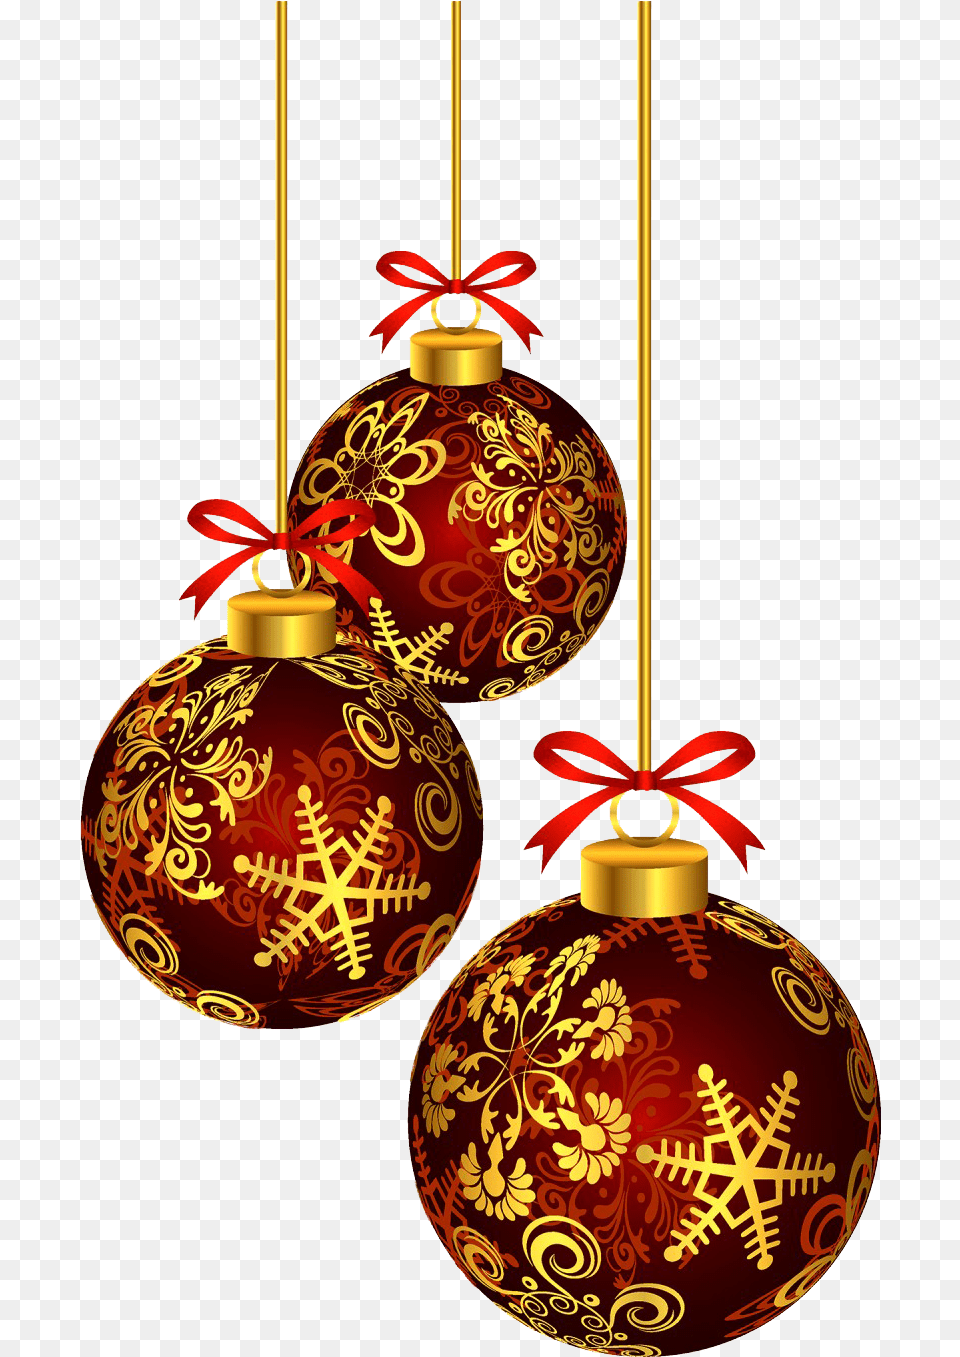 Balls Bolas Ornament Enfeite Merry Christmas Christmas Balls Transparent Background, Accessories Png Image